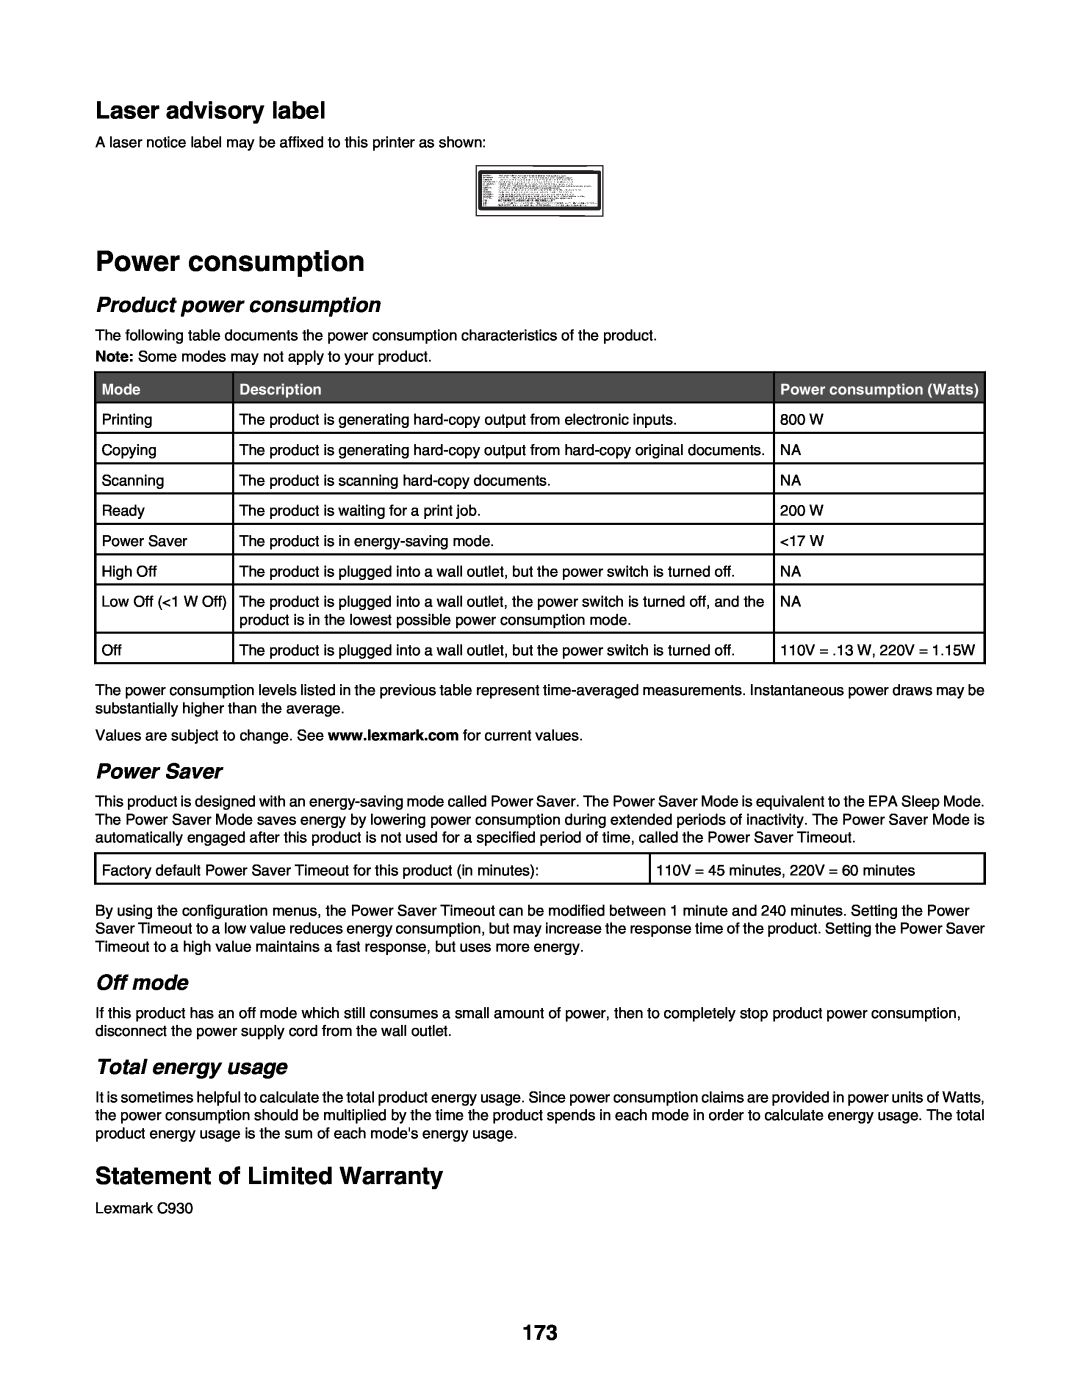 Lexmark C935 Power consumption, Laser advisory label, Statement of Limited Warranty, Product power consumption, Off mode 